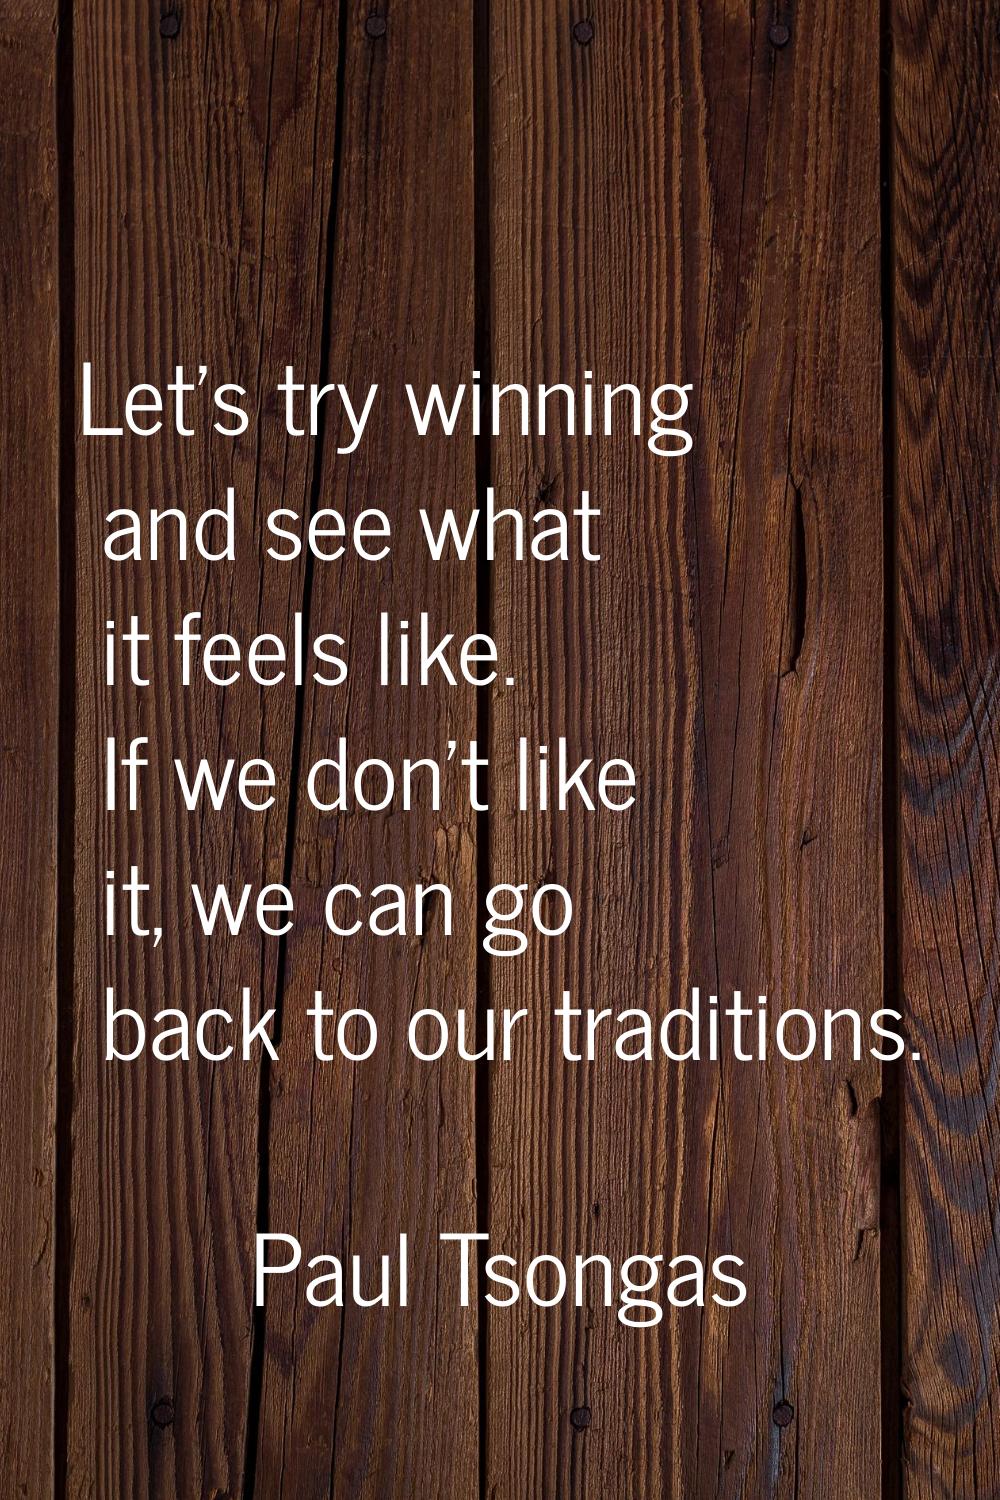 Let's try winning and see what it feels like. If we don't like it, we can go back to our traditions